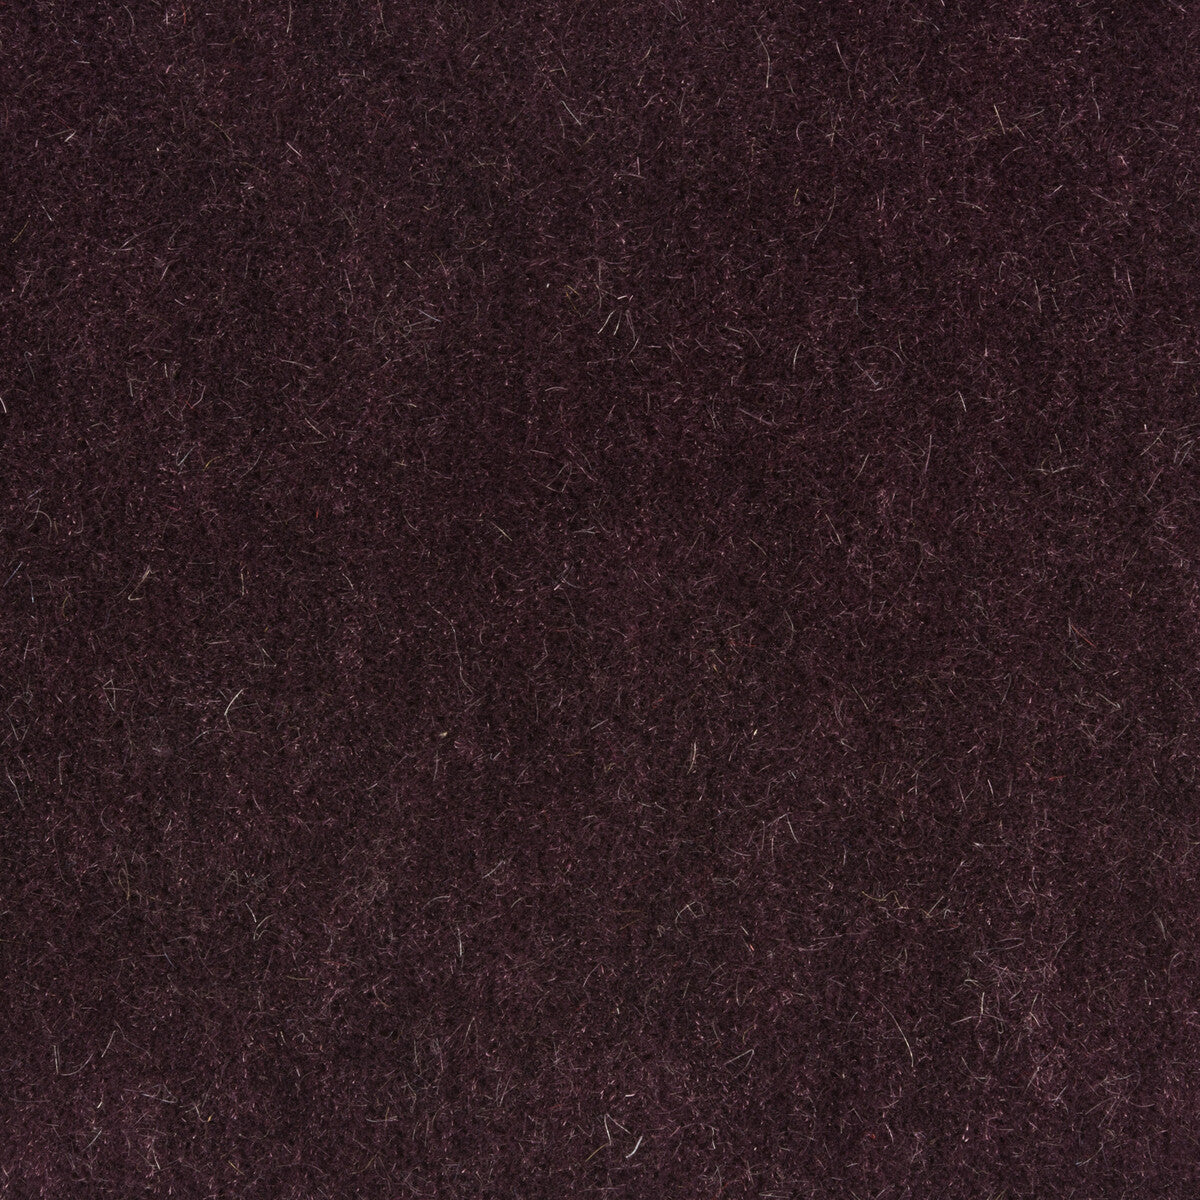 Bachelor Mohair fabric in concord color - pattern 8014101.10.0 - by Brunschwig &amp; Fils